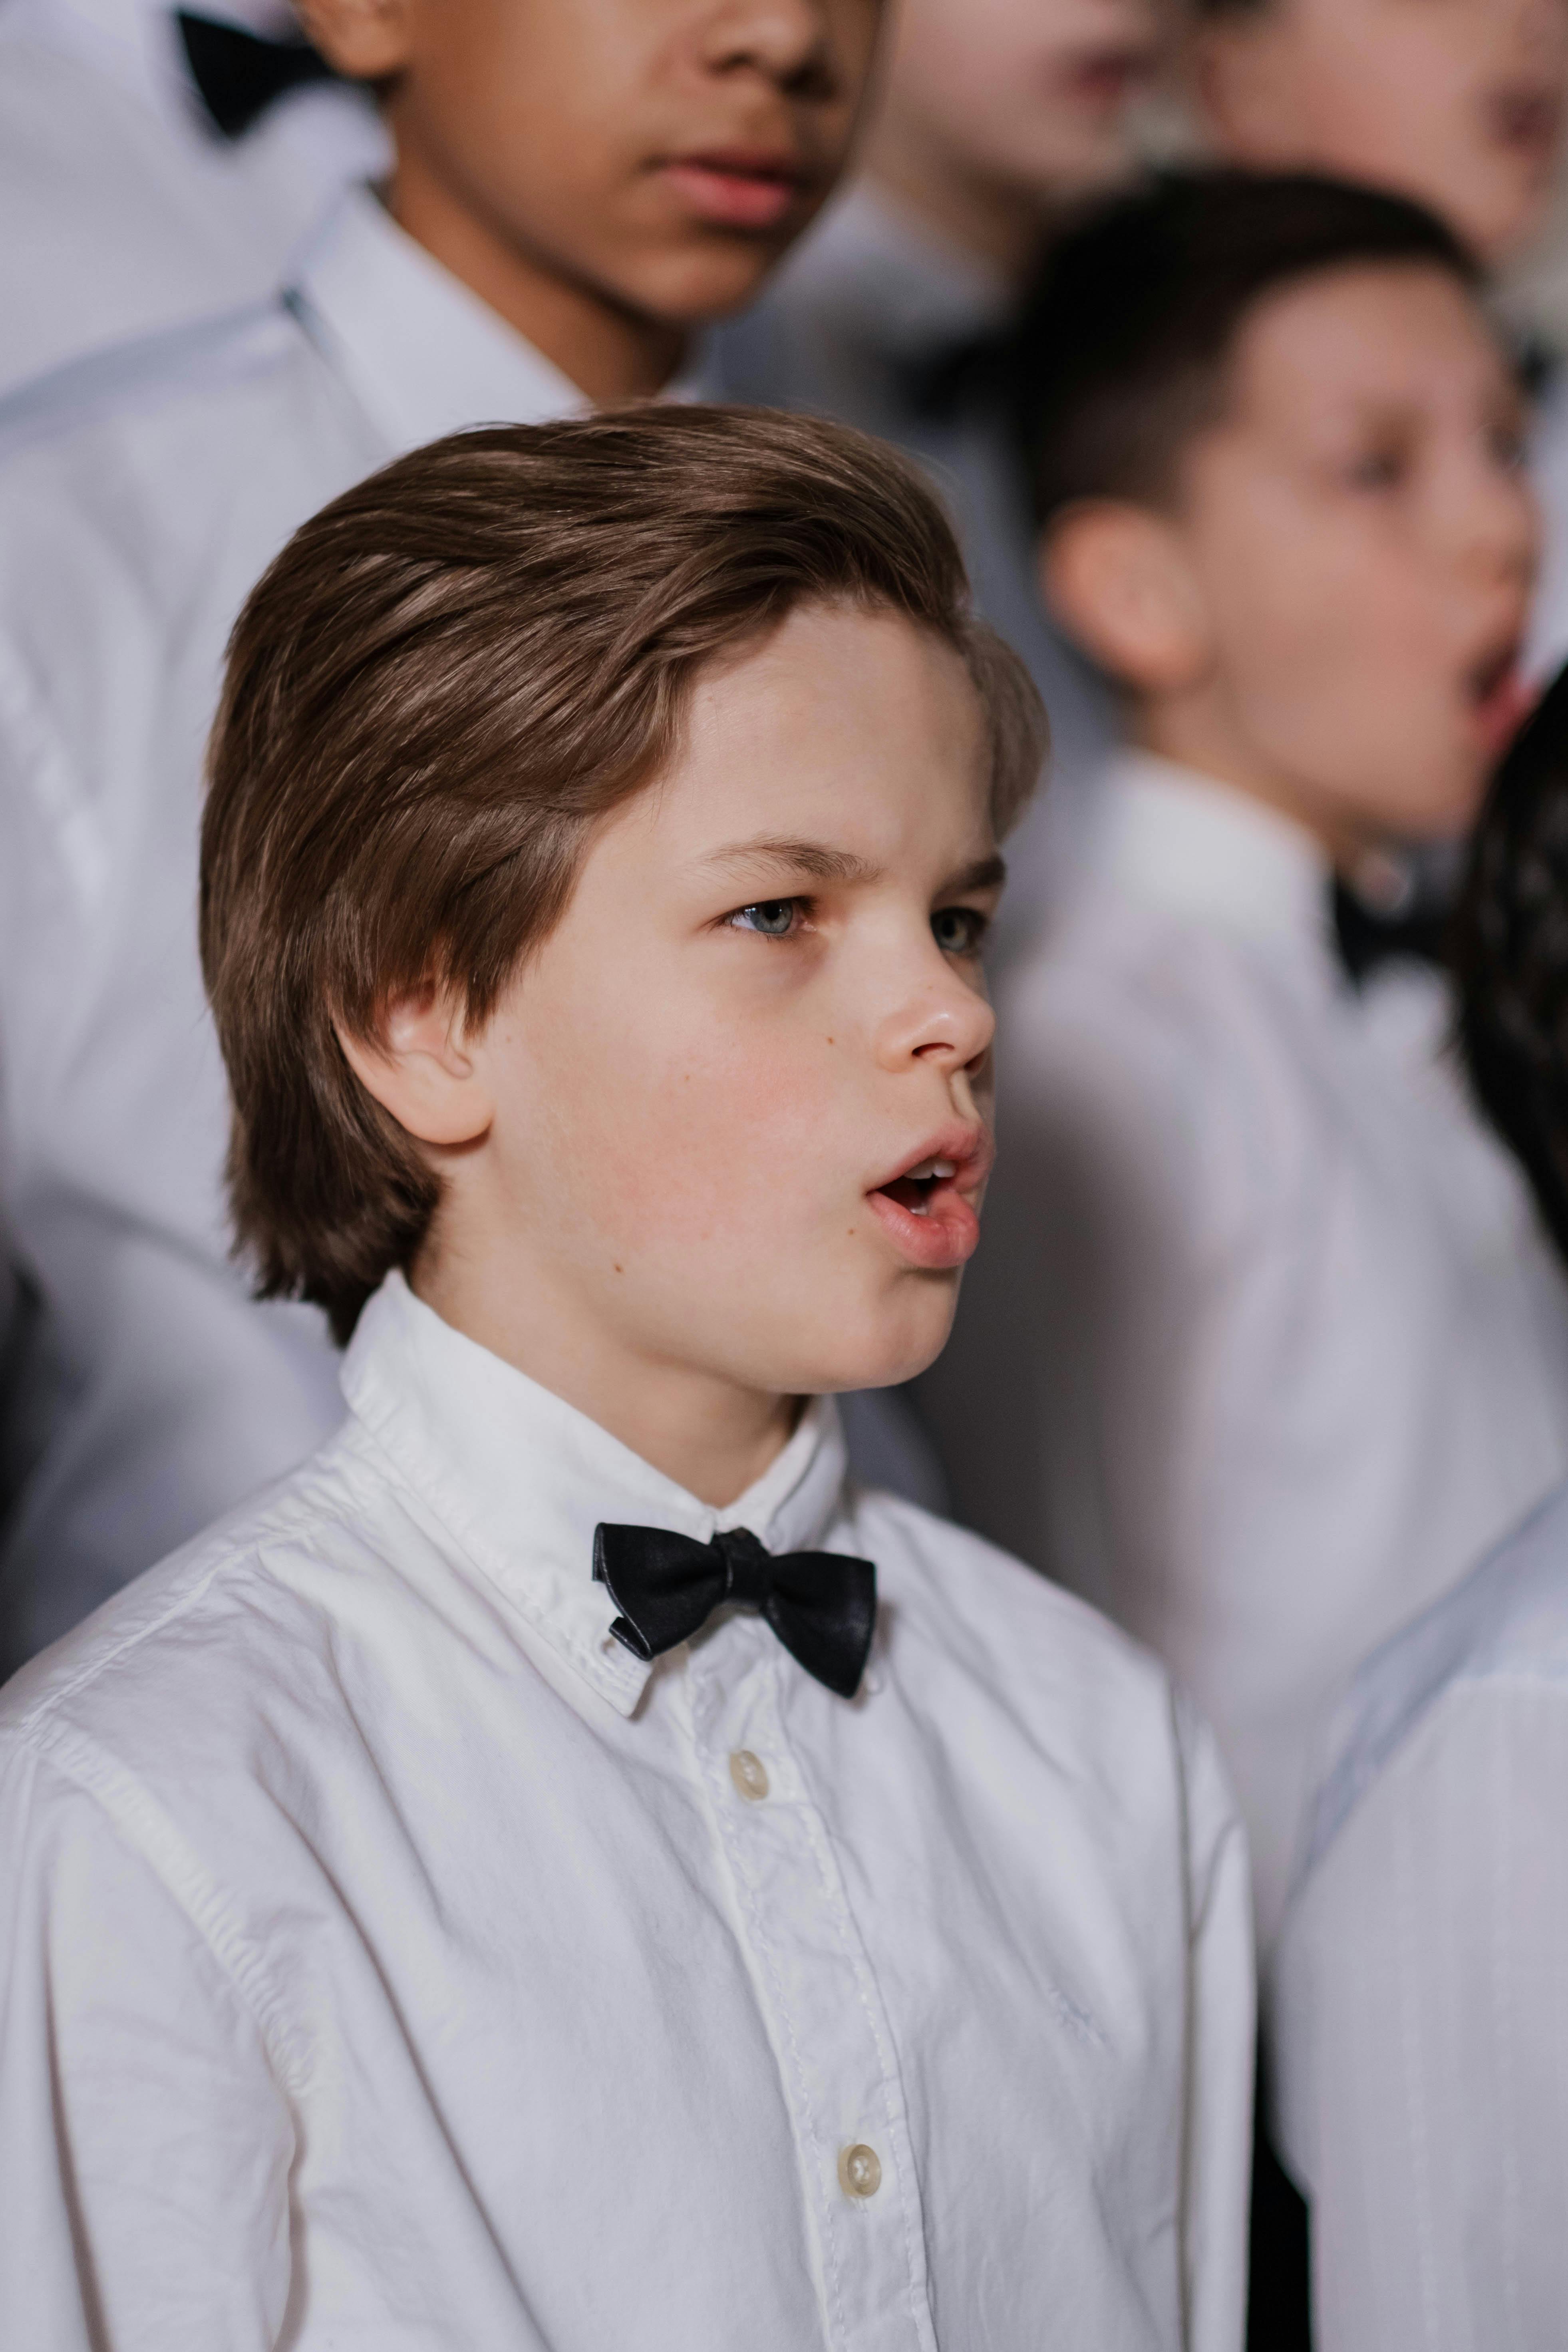 boy in white shirt and black bowtie singing